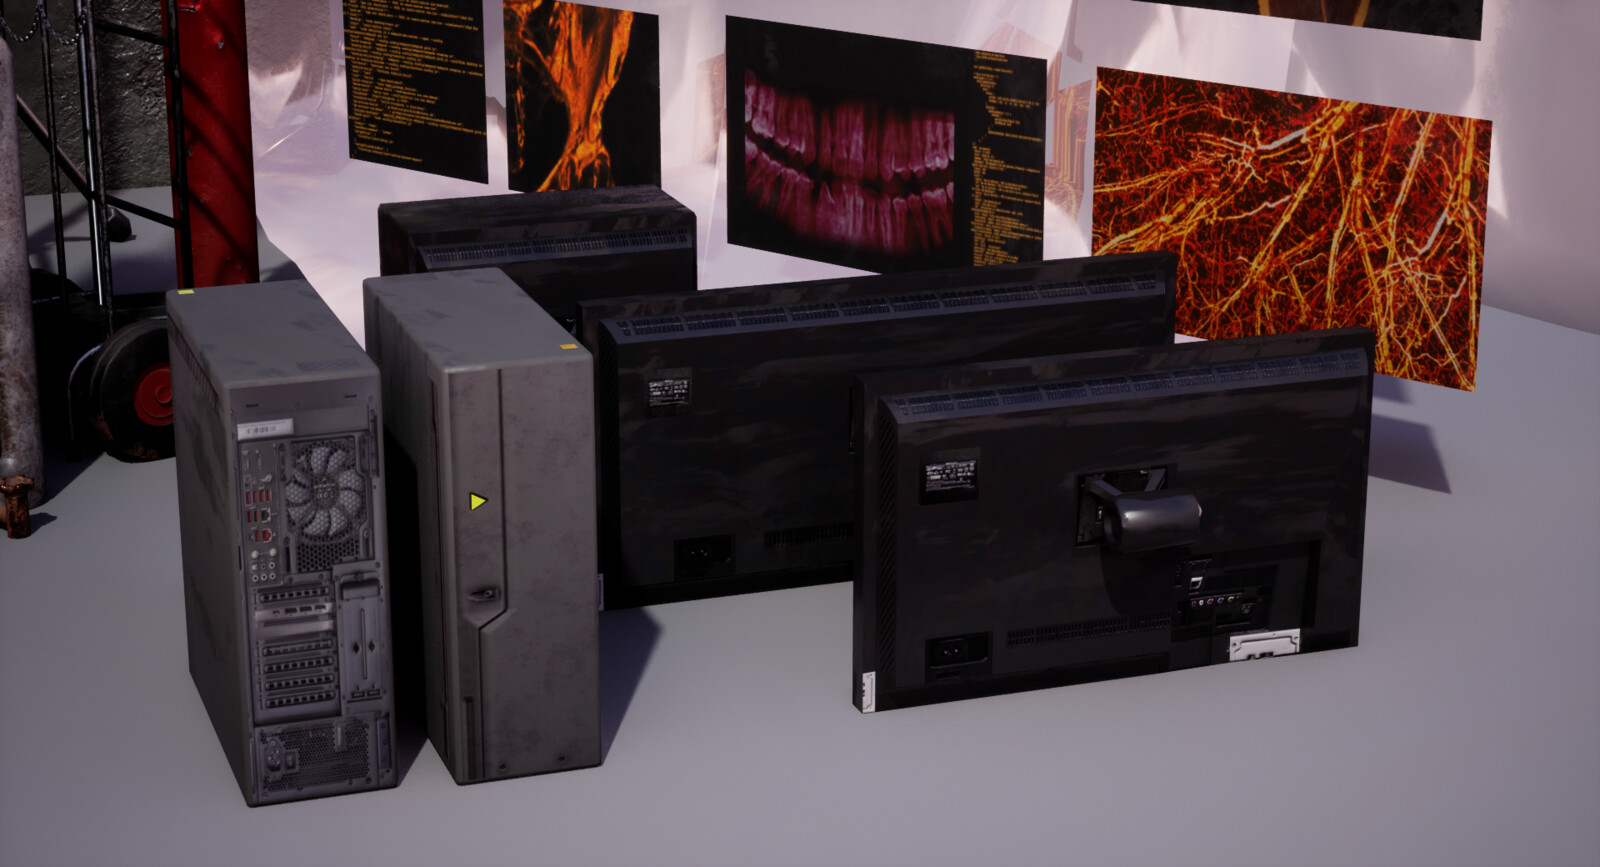 3 main forms of monitor case and many screen variants. screen uses mix of 3 different materials